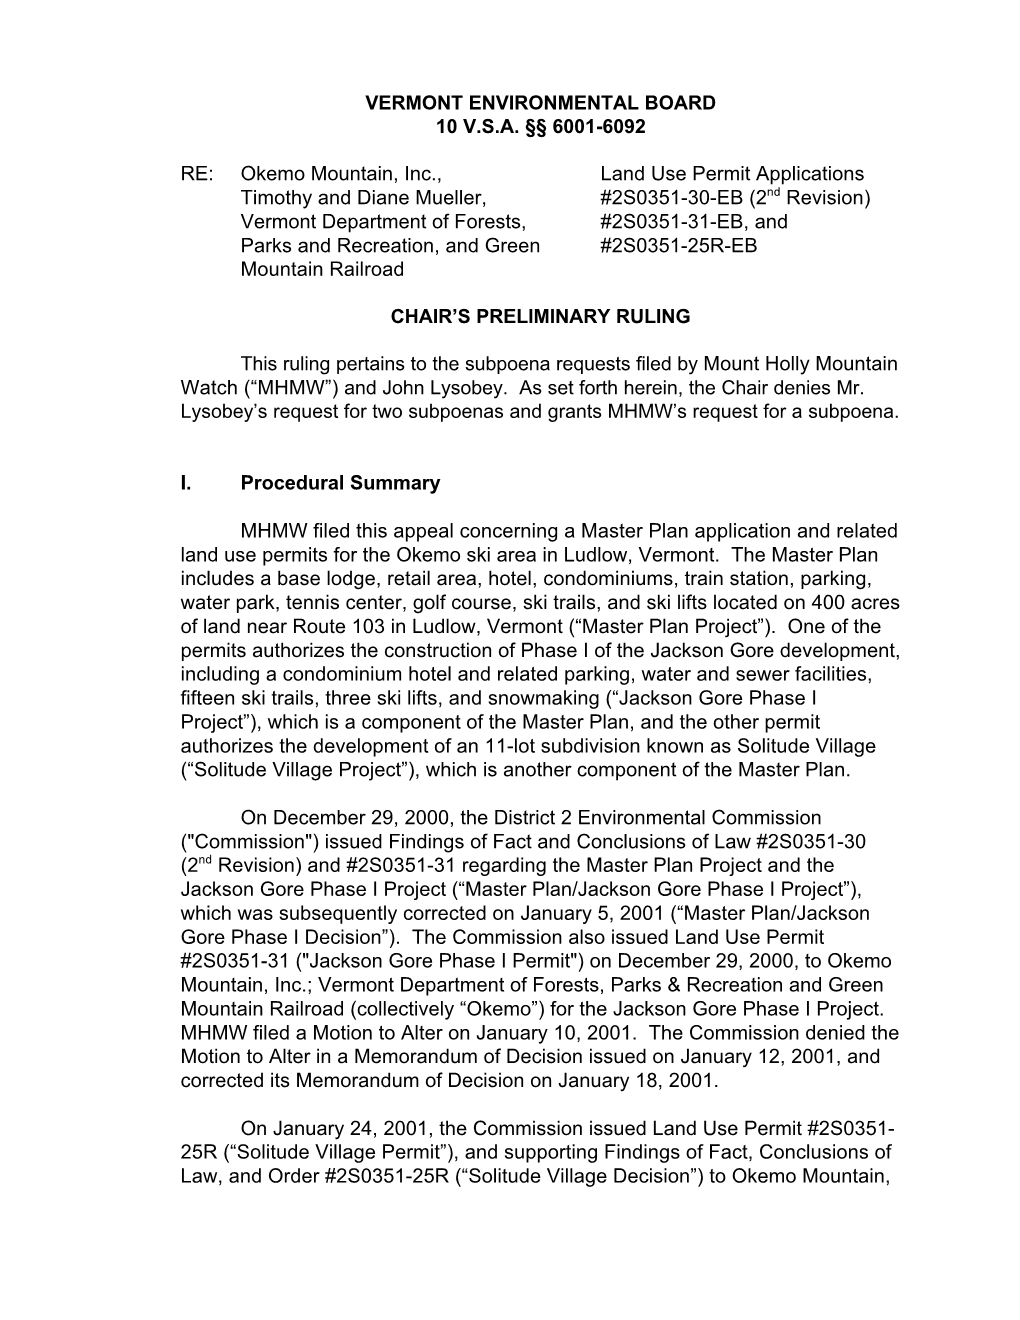 RE: Okemo Mountain, Inc., Land Use Permit Applications Timothy And